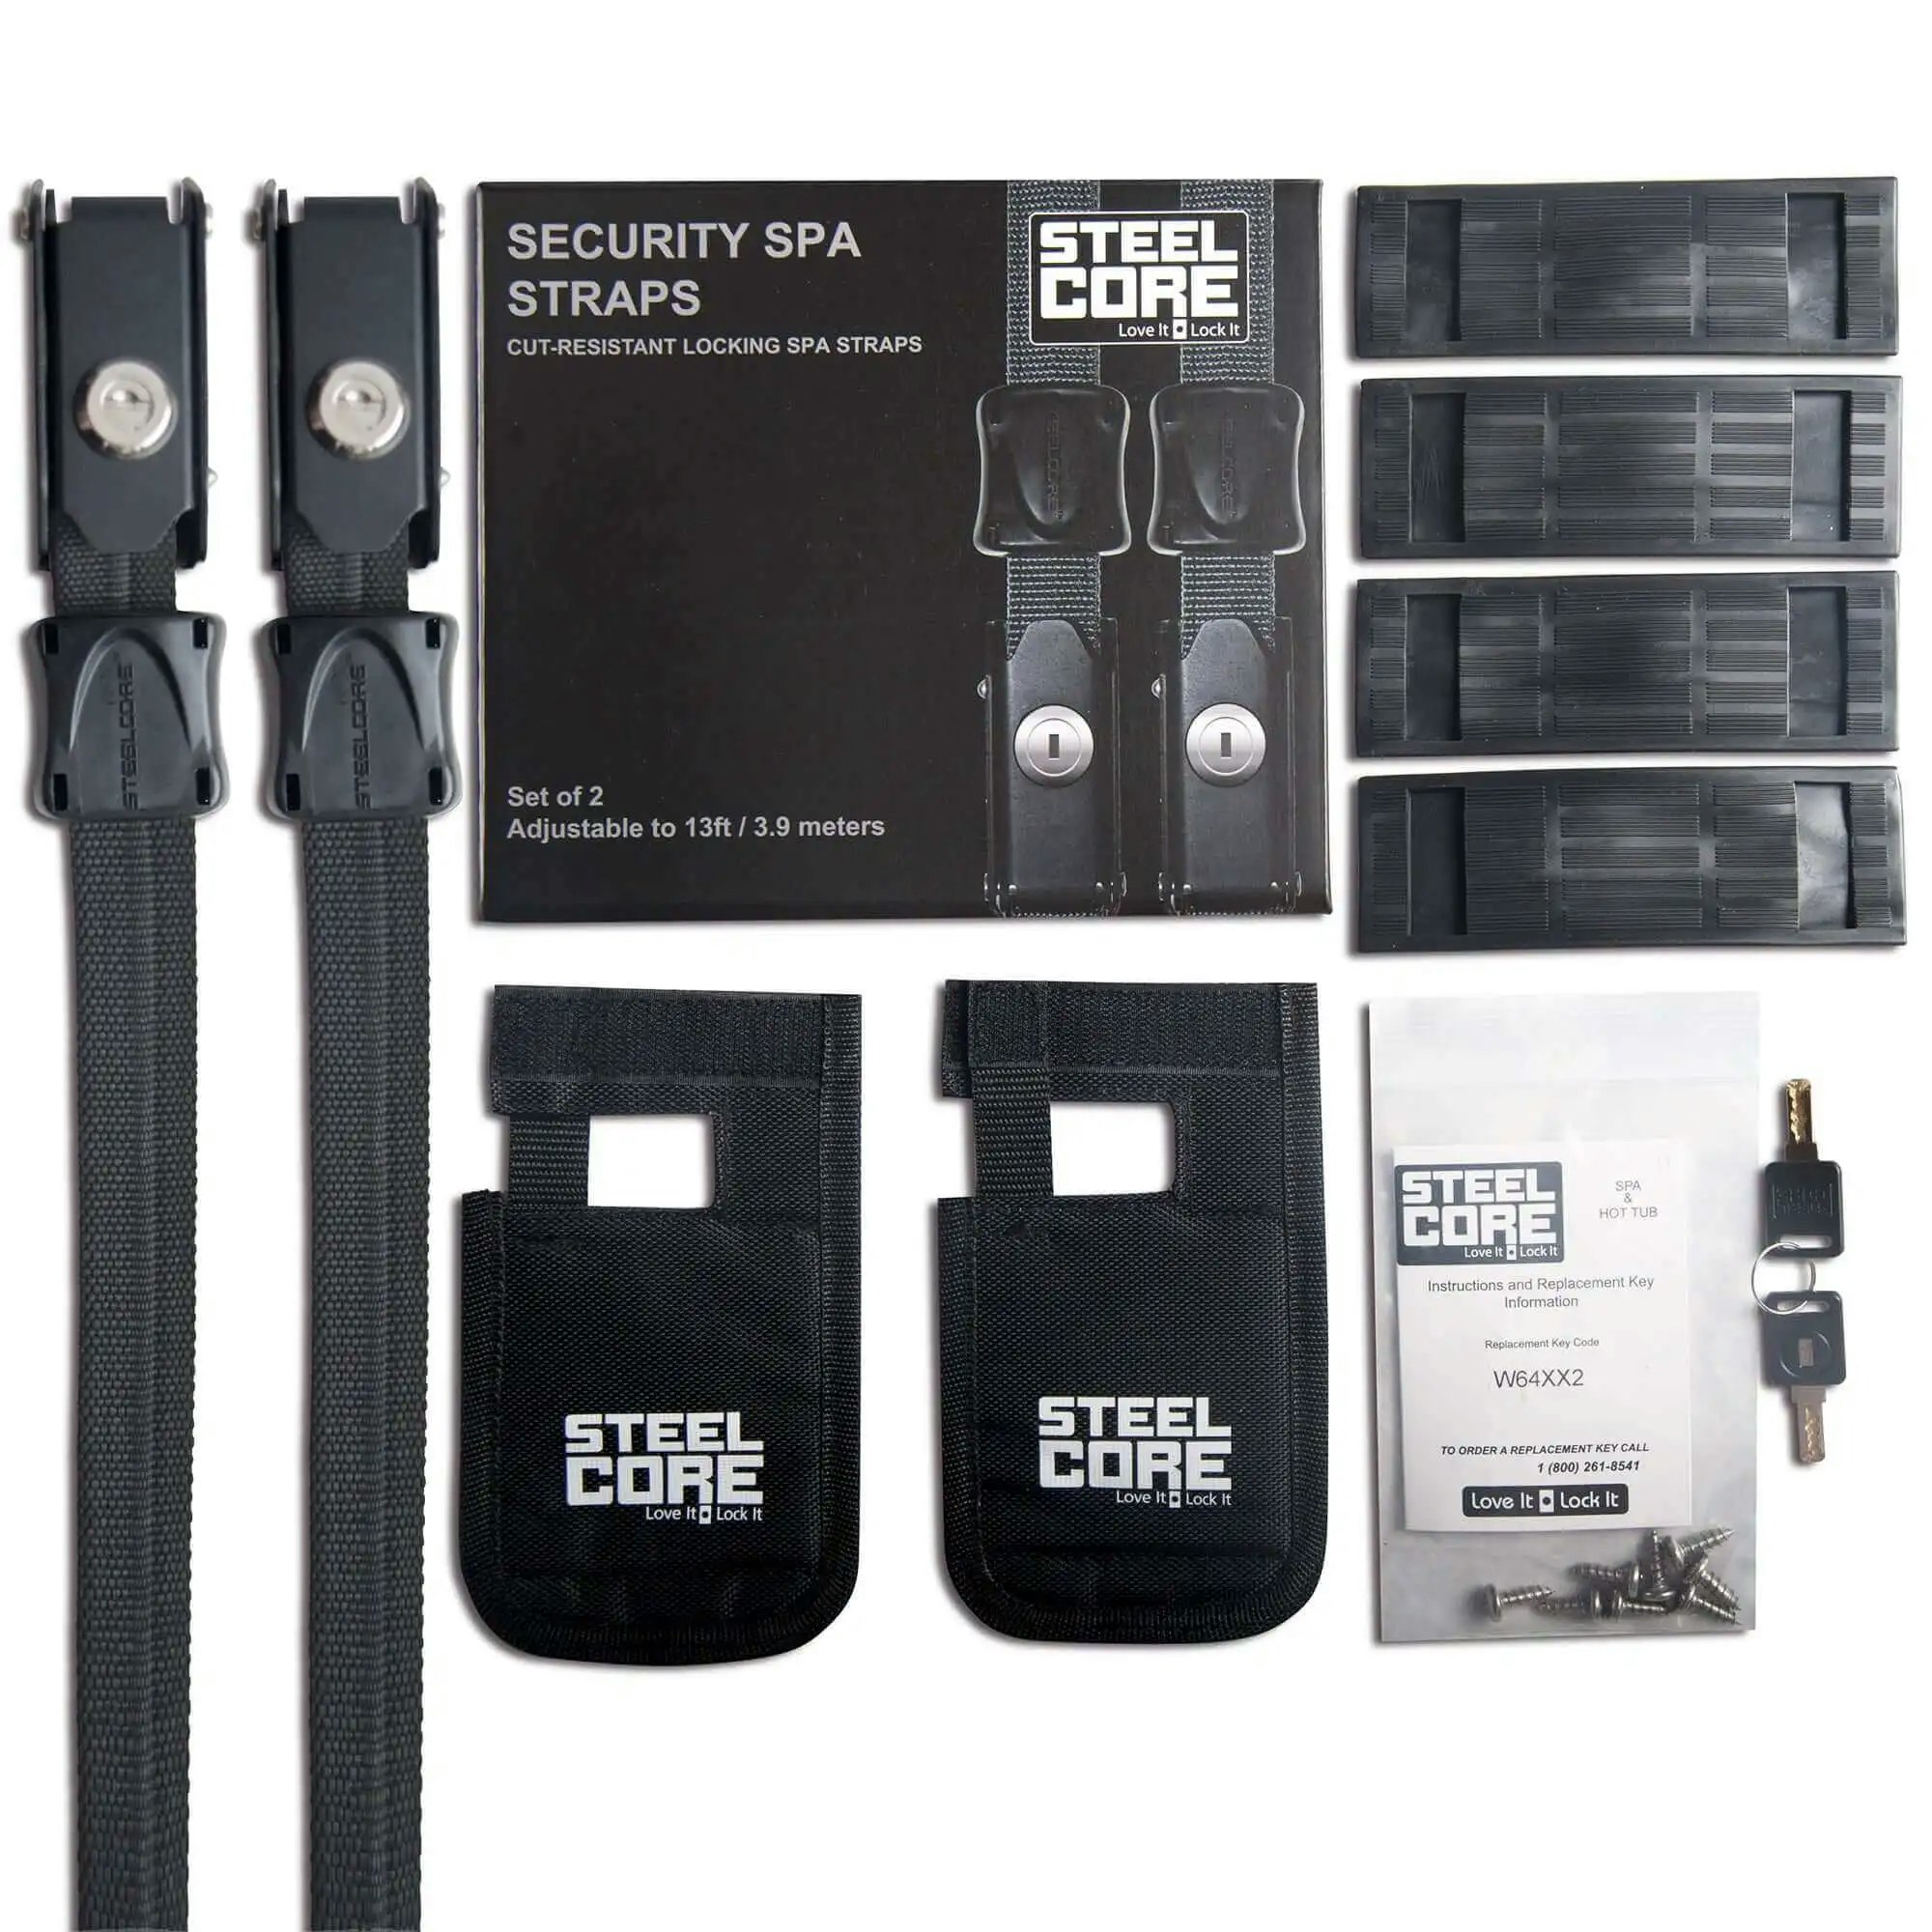 SteelCore Spa Security Straps